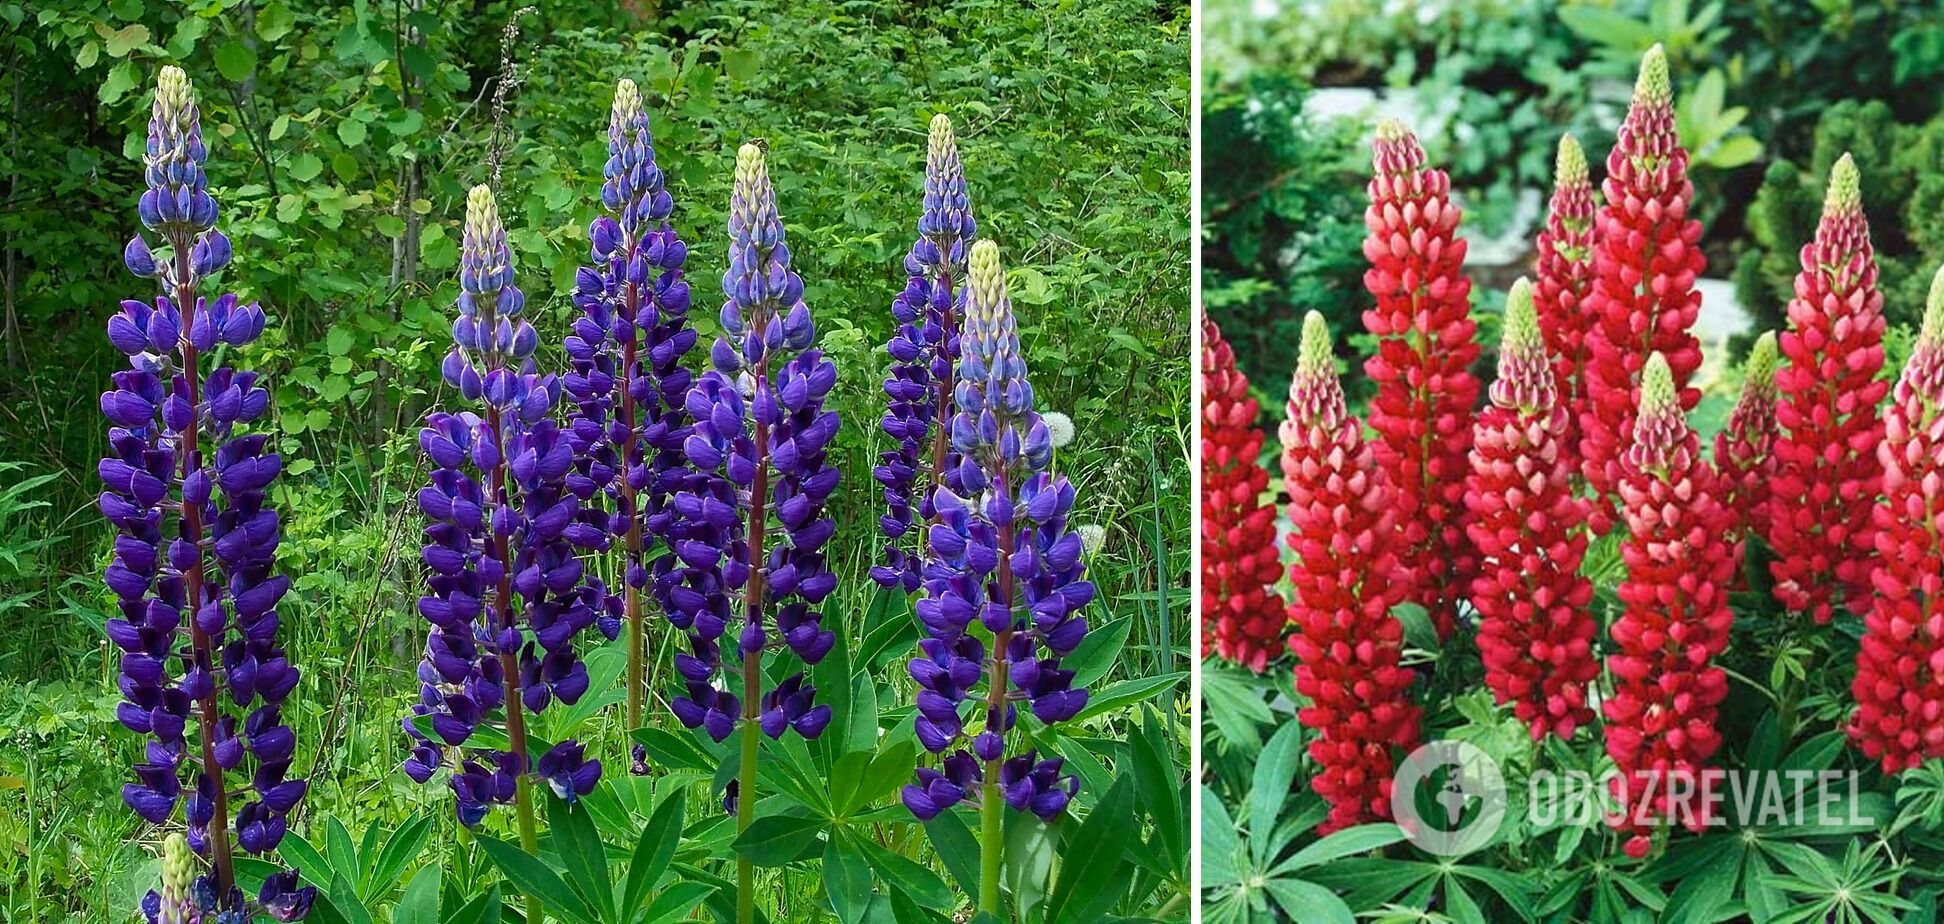 What perennials to sow in the garden in March: the most beautiful varieties